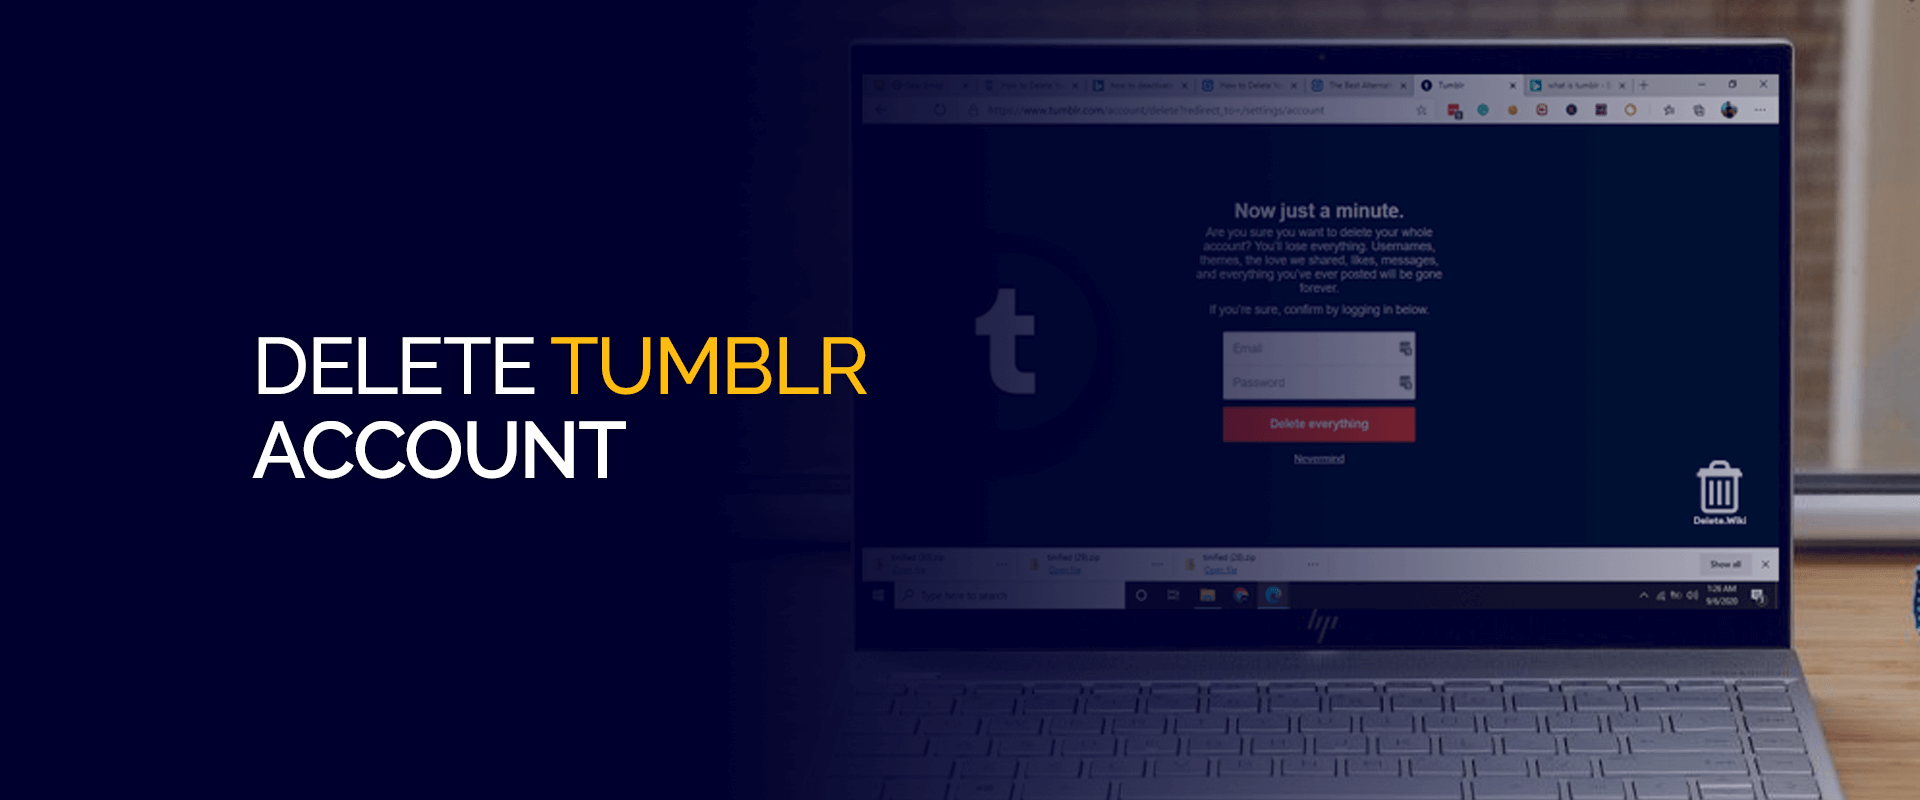 How to Delete your Tumblr Account or its Content